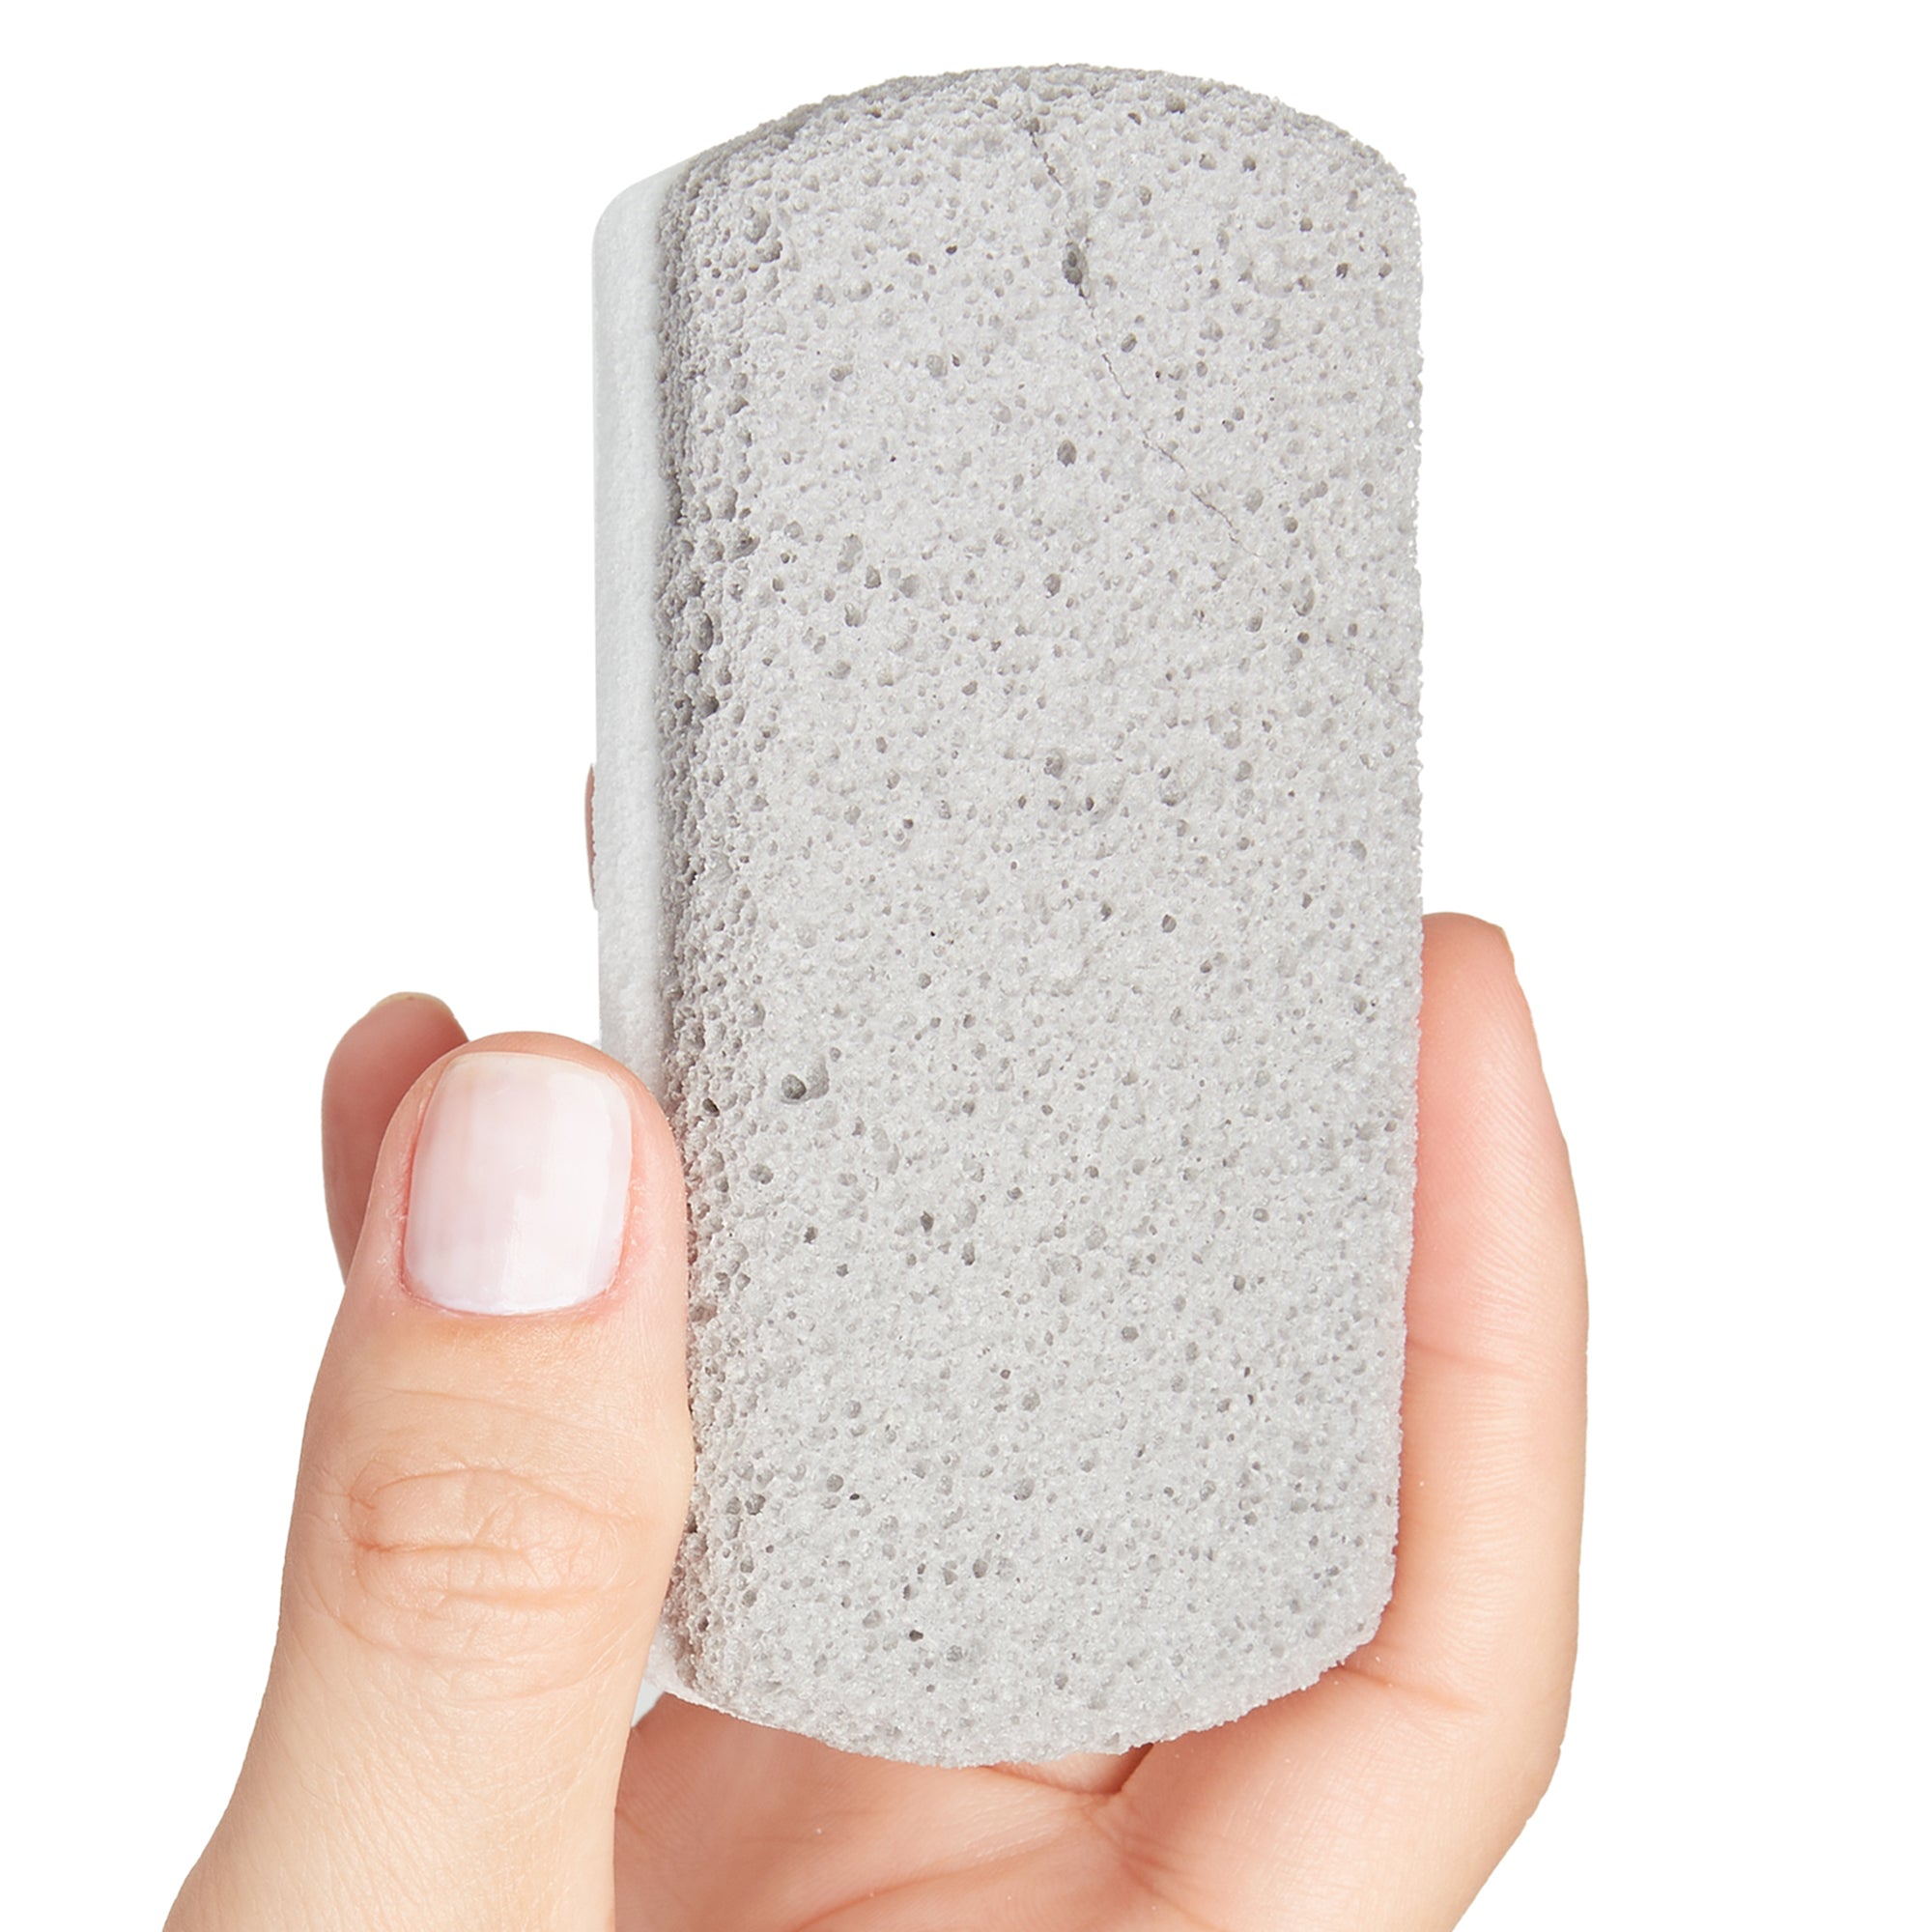 Pedicure Pumice Stones Double Sided - 2 Pack - ZenToes